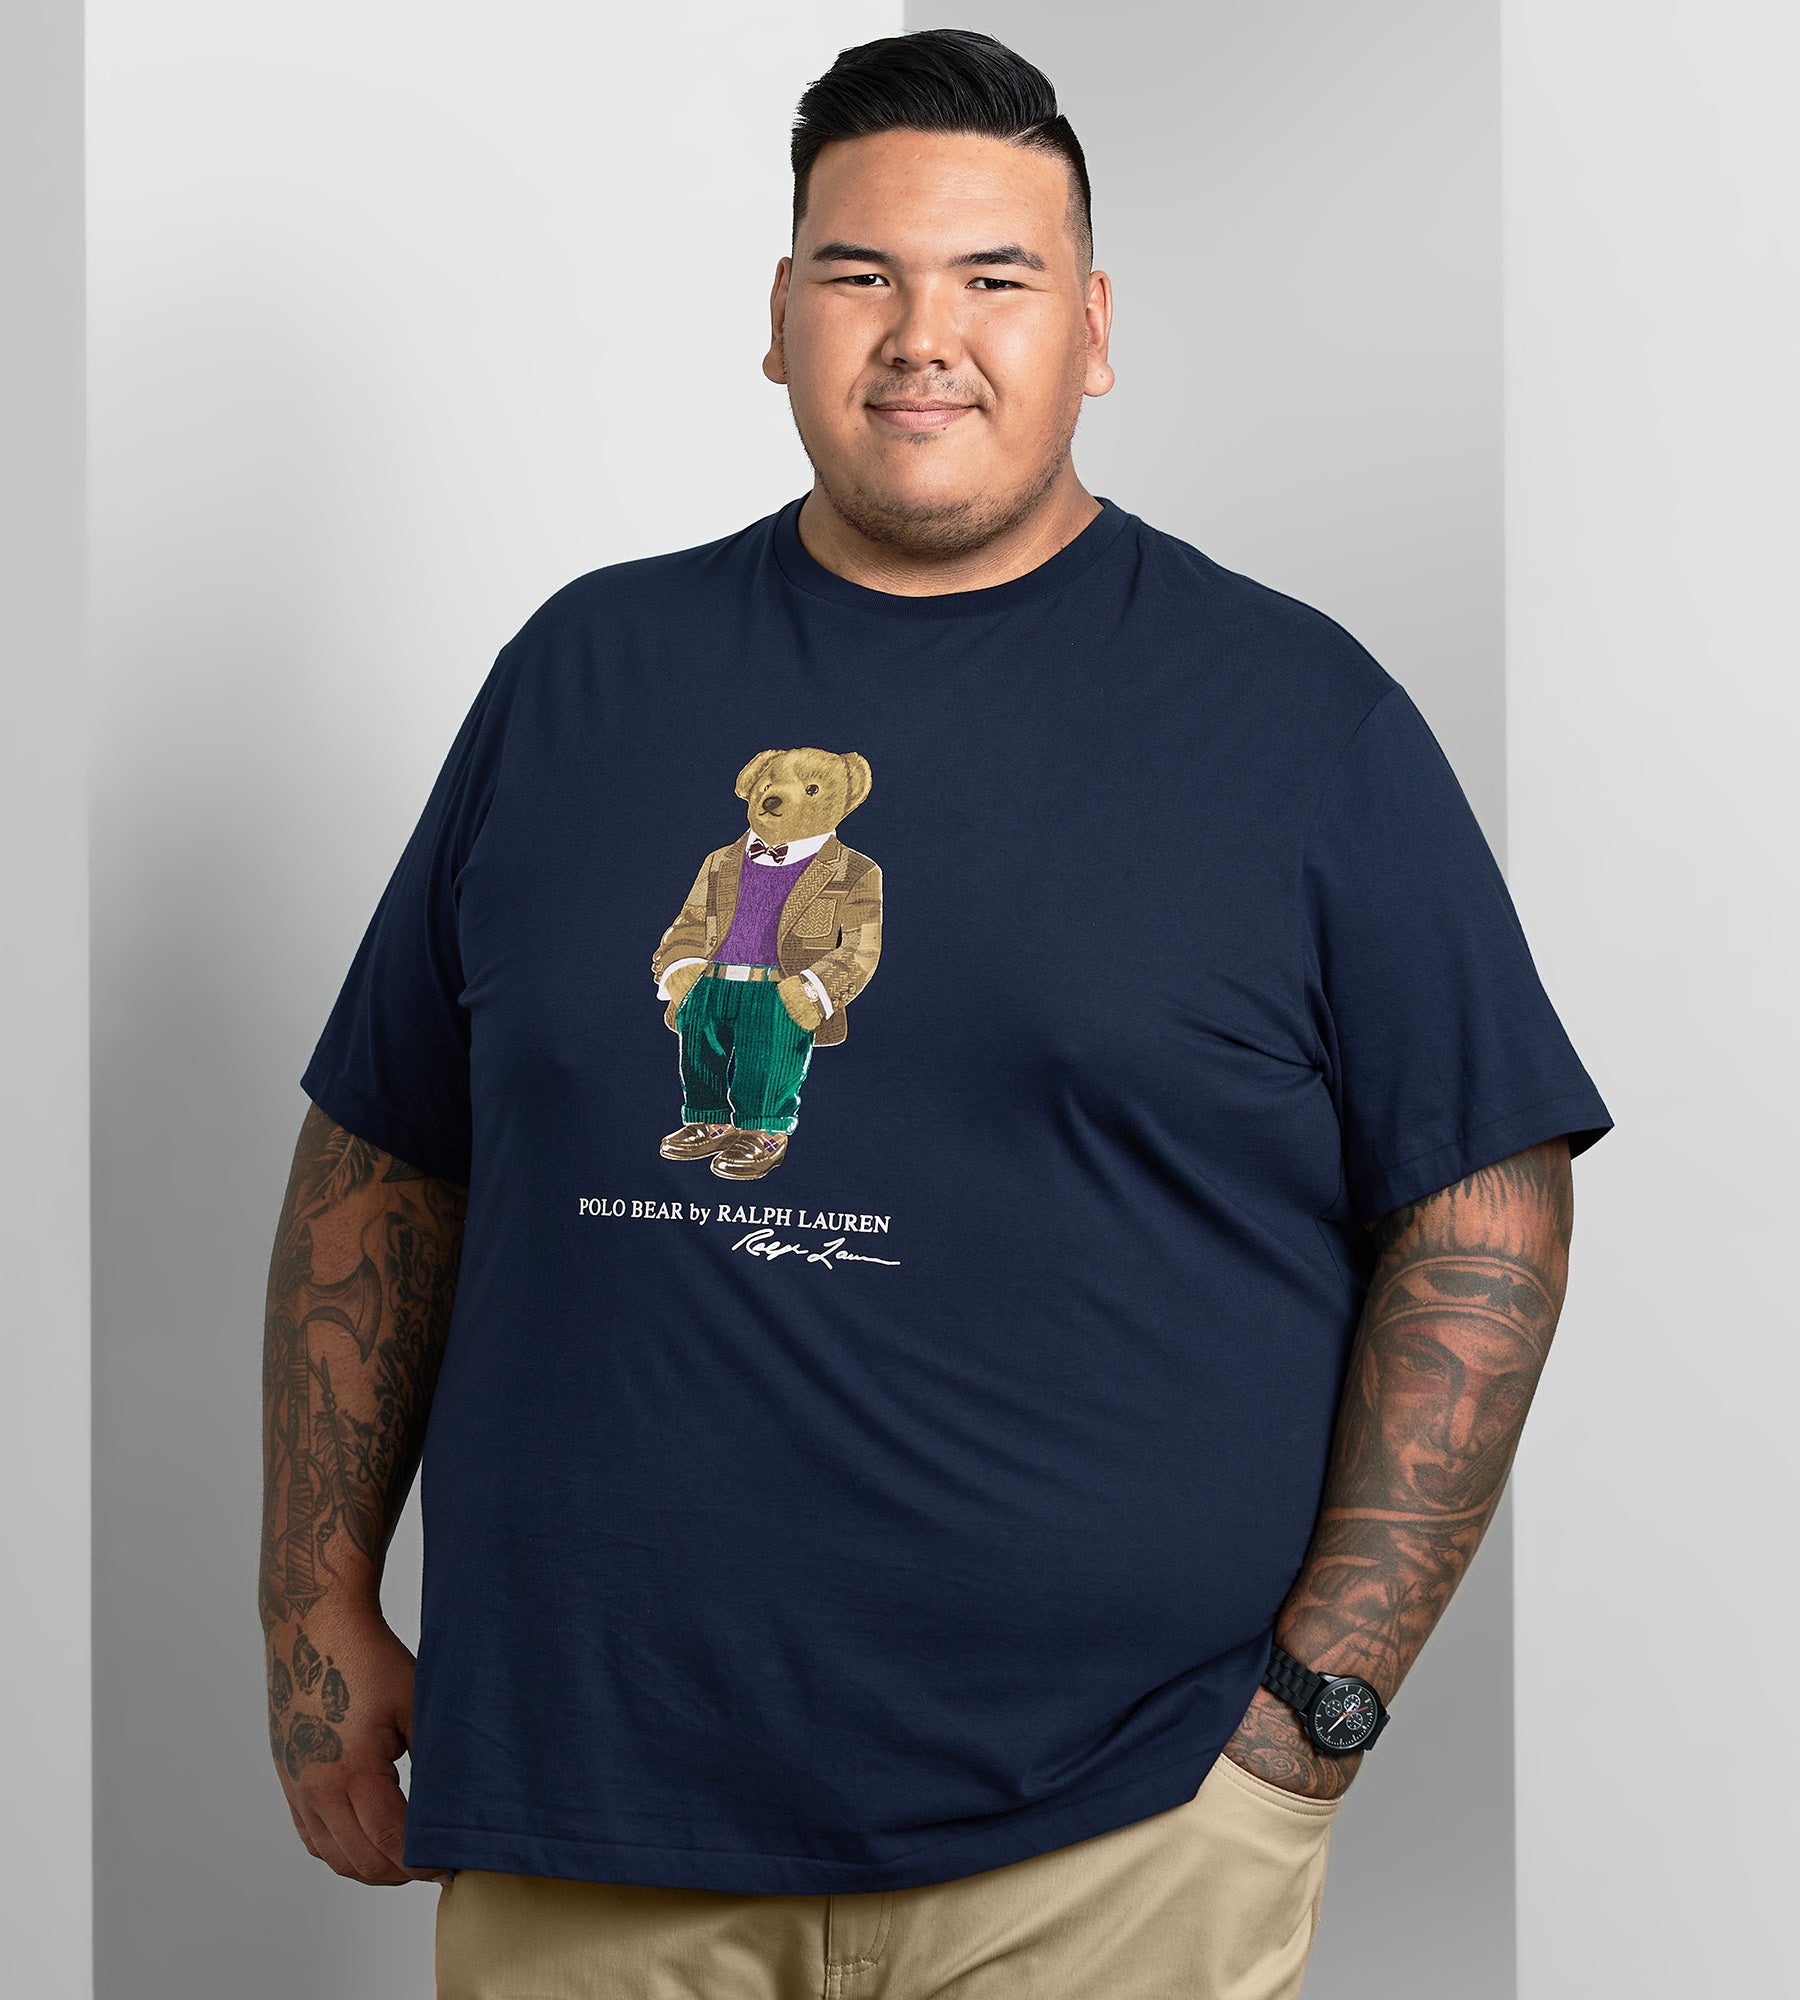 Polo Bear Graphic Tee product